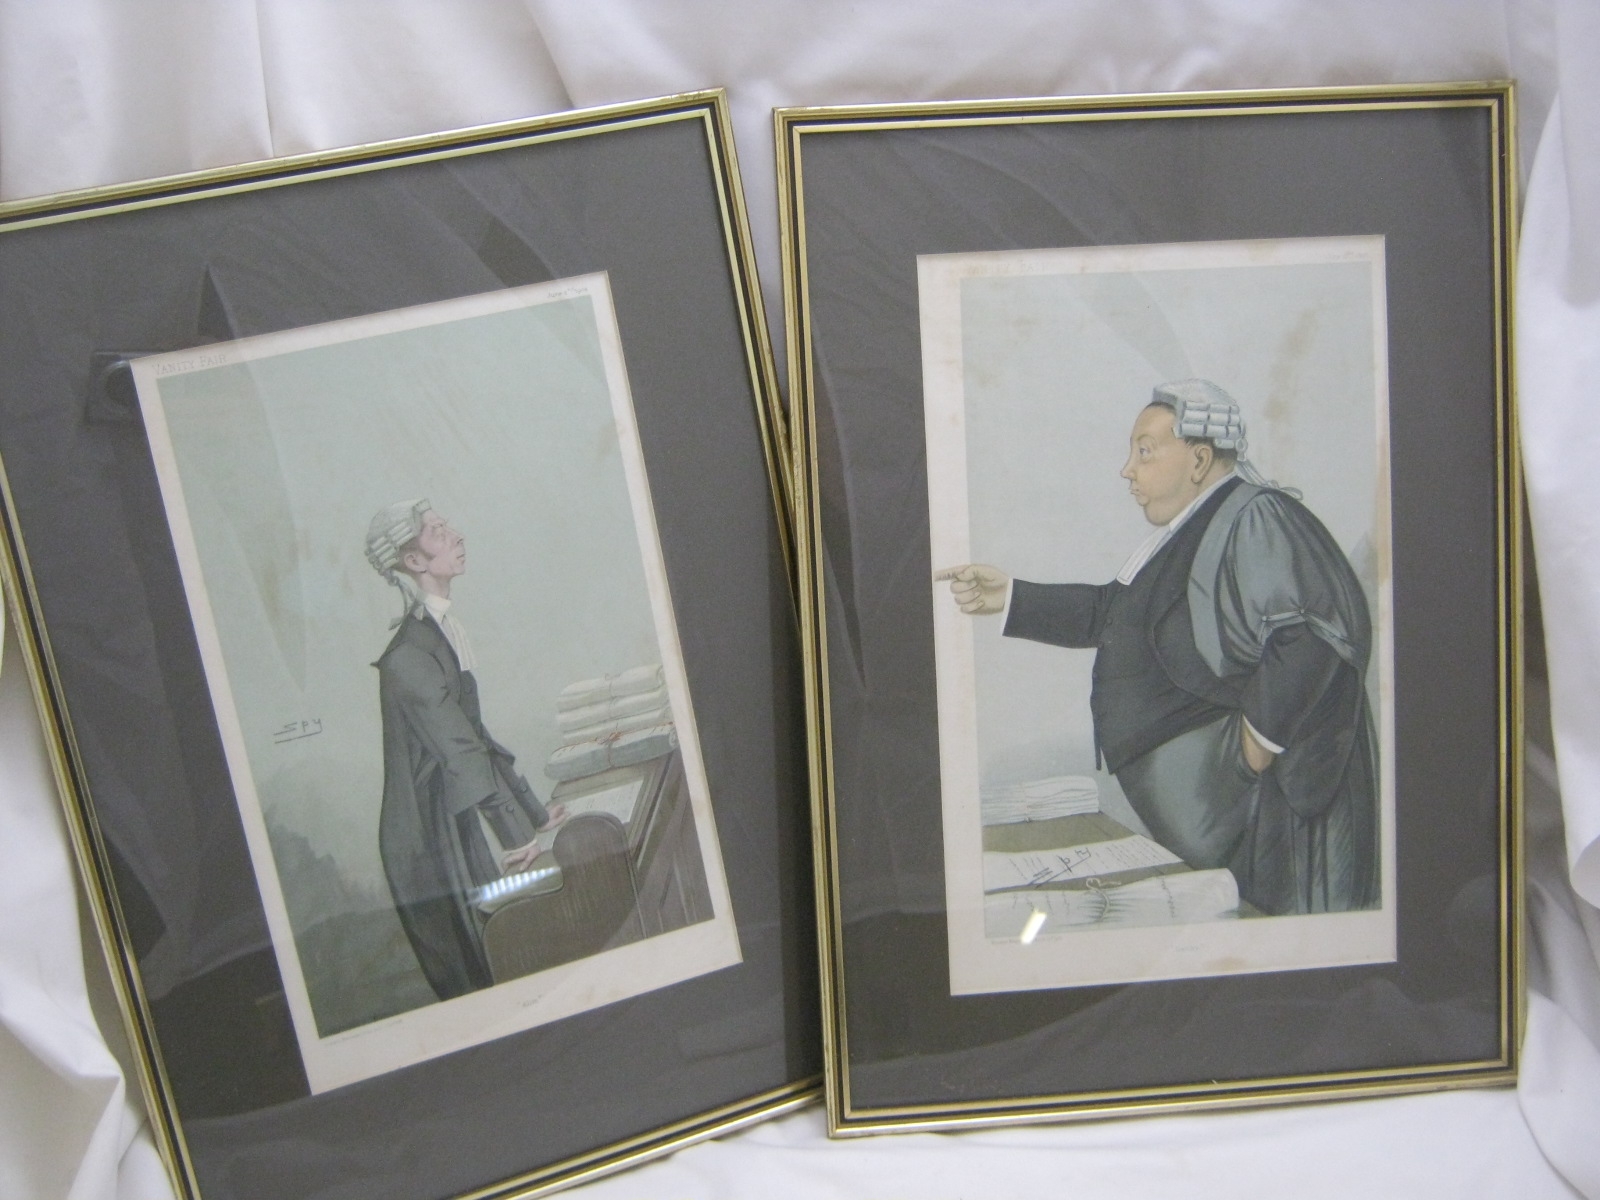 Six Vanity Fair col'd litho prints, Judges and Barristers, all f/g (6)